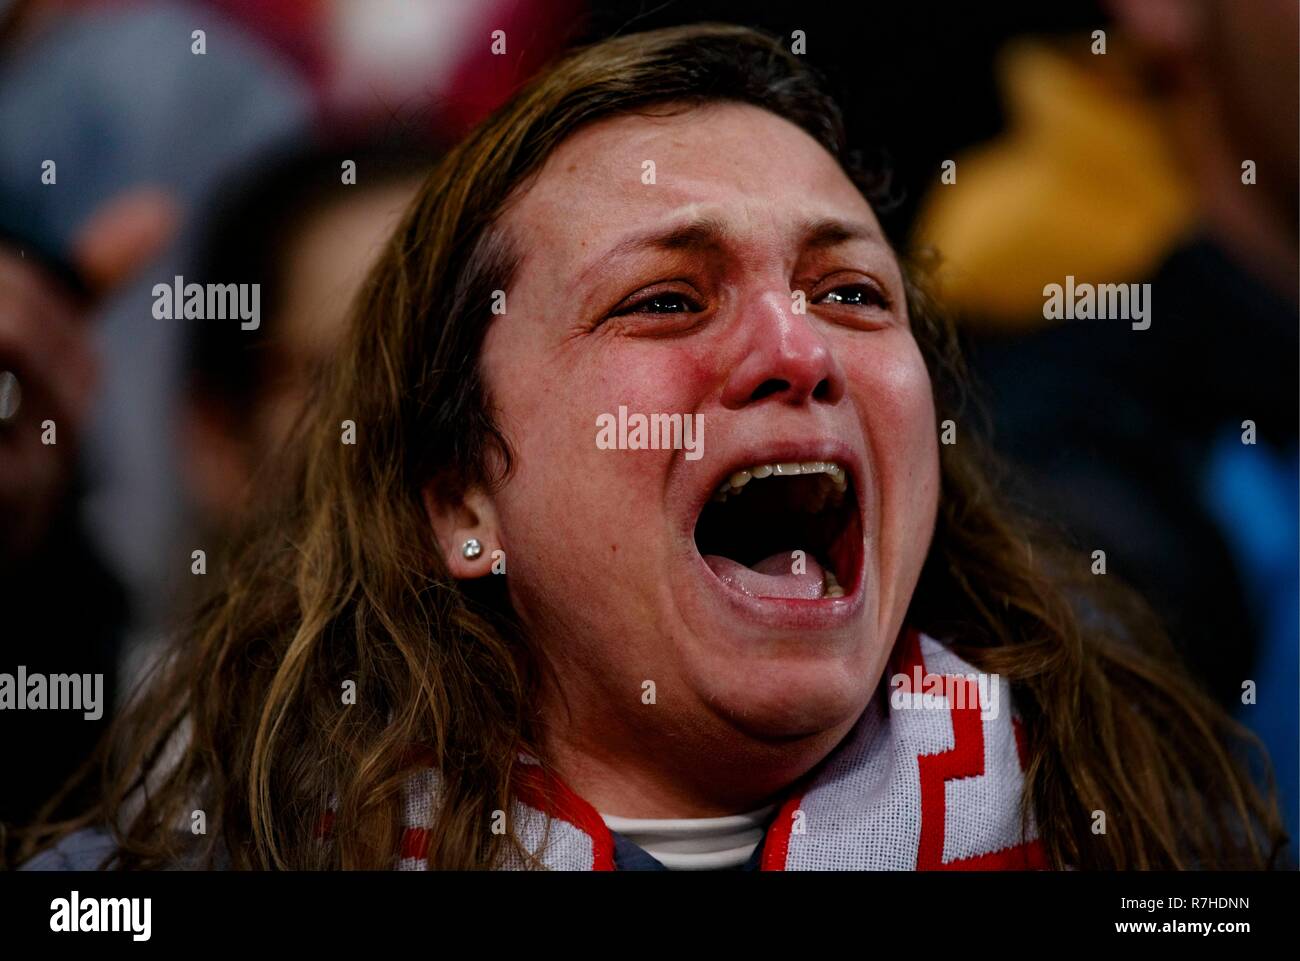 A fan of River Plate crying during the Copa Libertadores final 2018/19 match between Boca Juniors and River Plate, at Santiago Bernabeu Stadium in Madrid on December 9, 2018. (Photo by Guille Martinez/Cordon Press)  Cordon Press Stock Photo